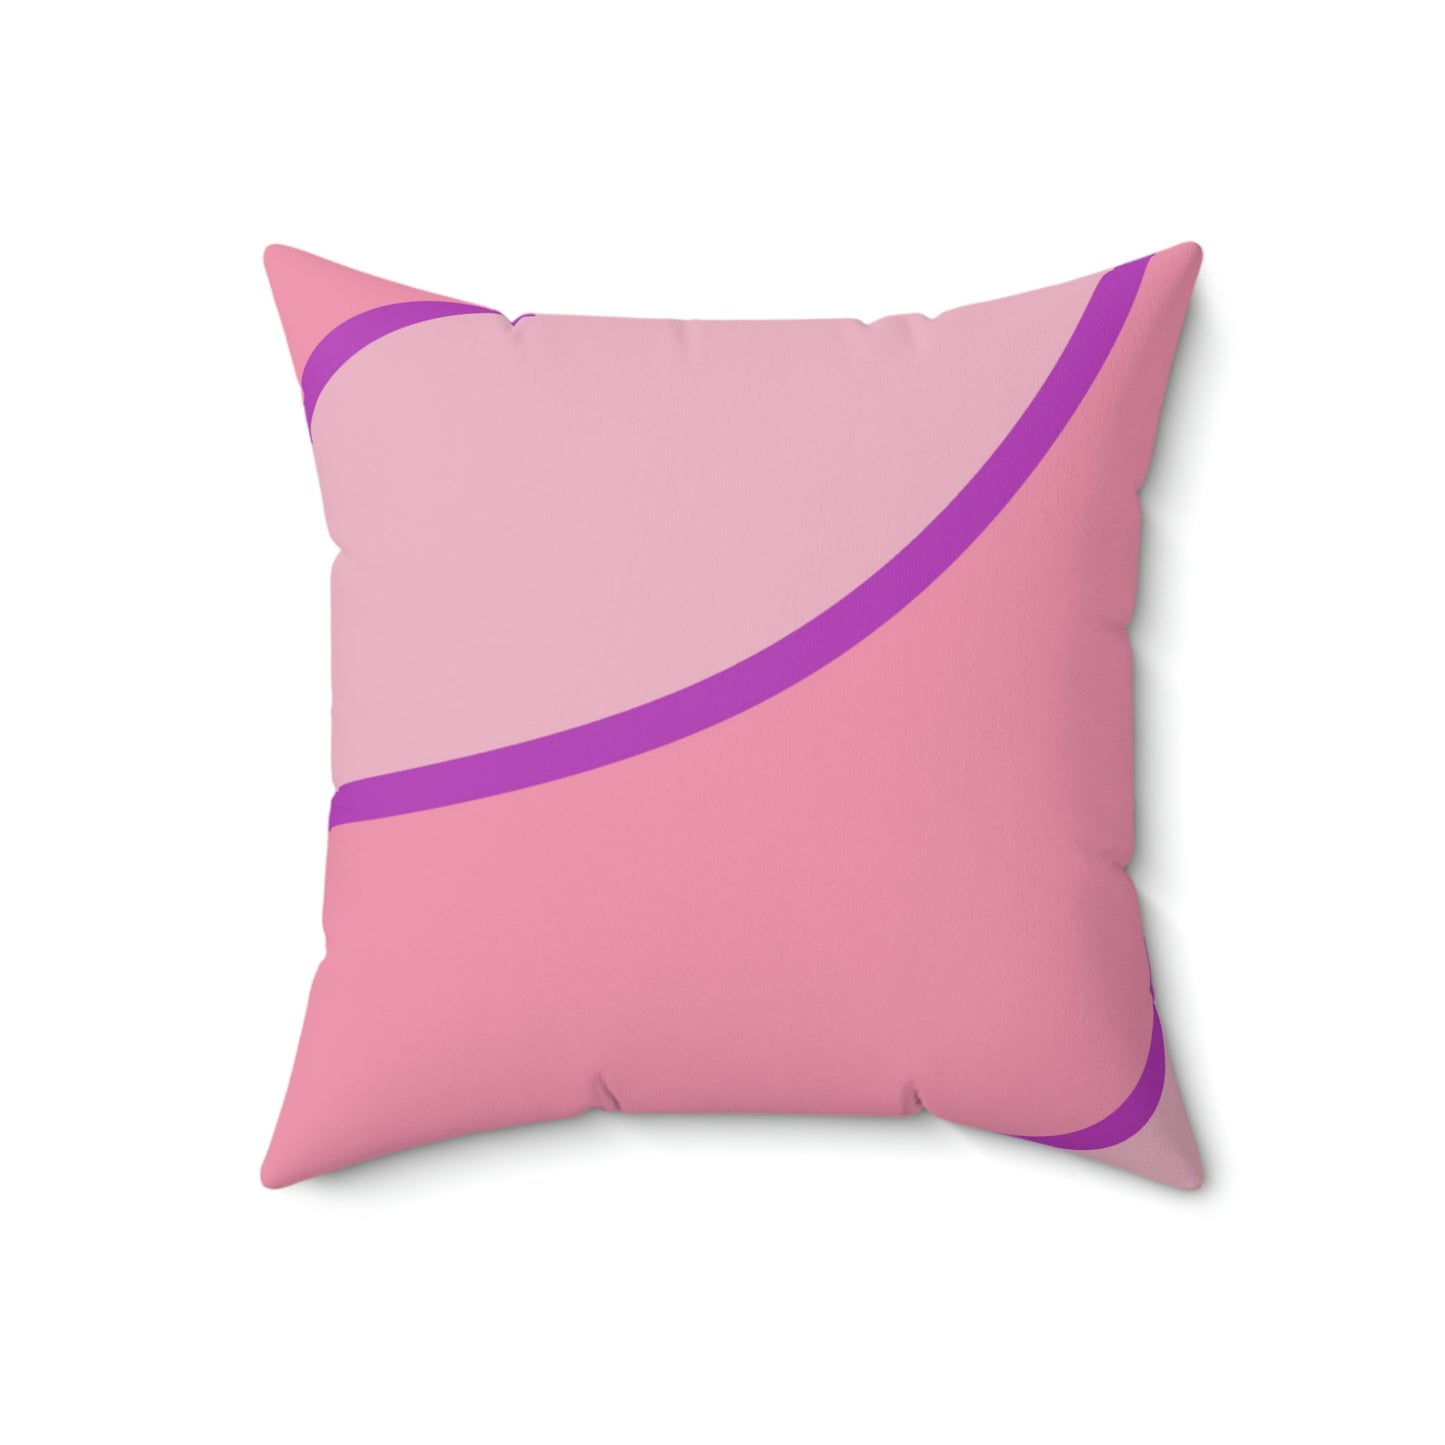 Girls Love Stripes Square Pillow Home Decor Pink Sweetheart